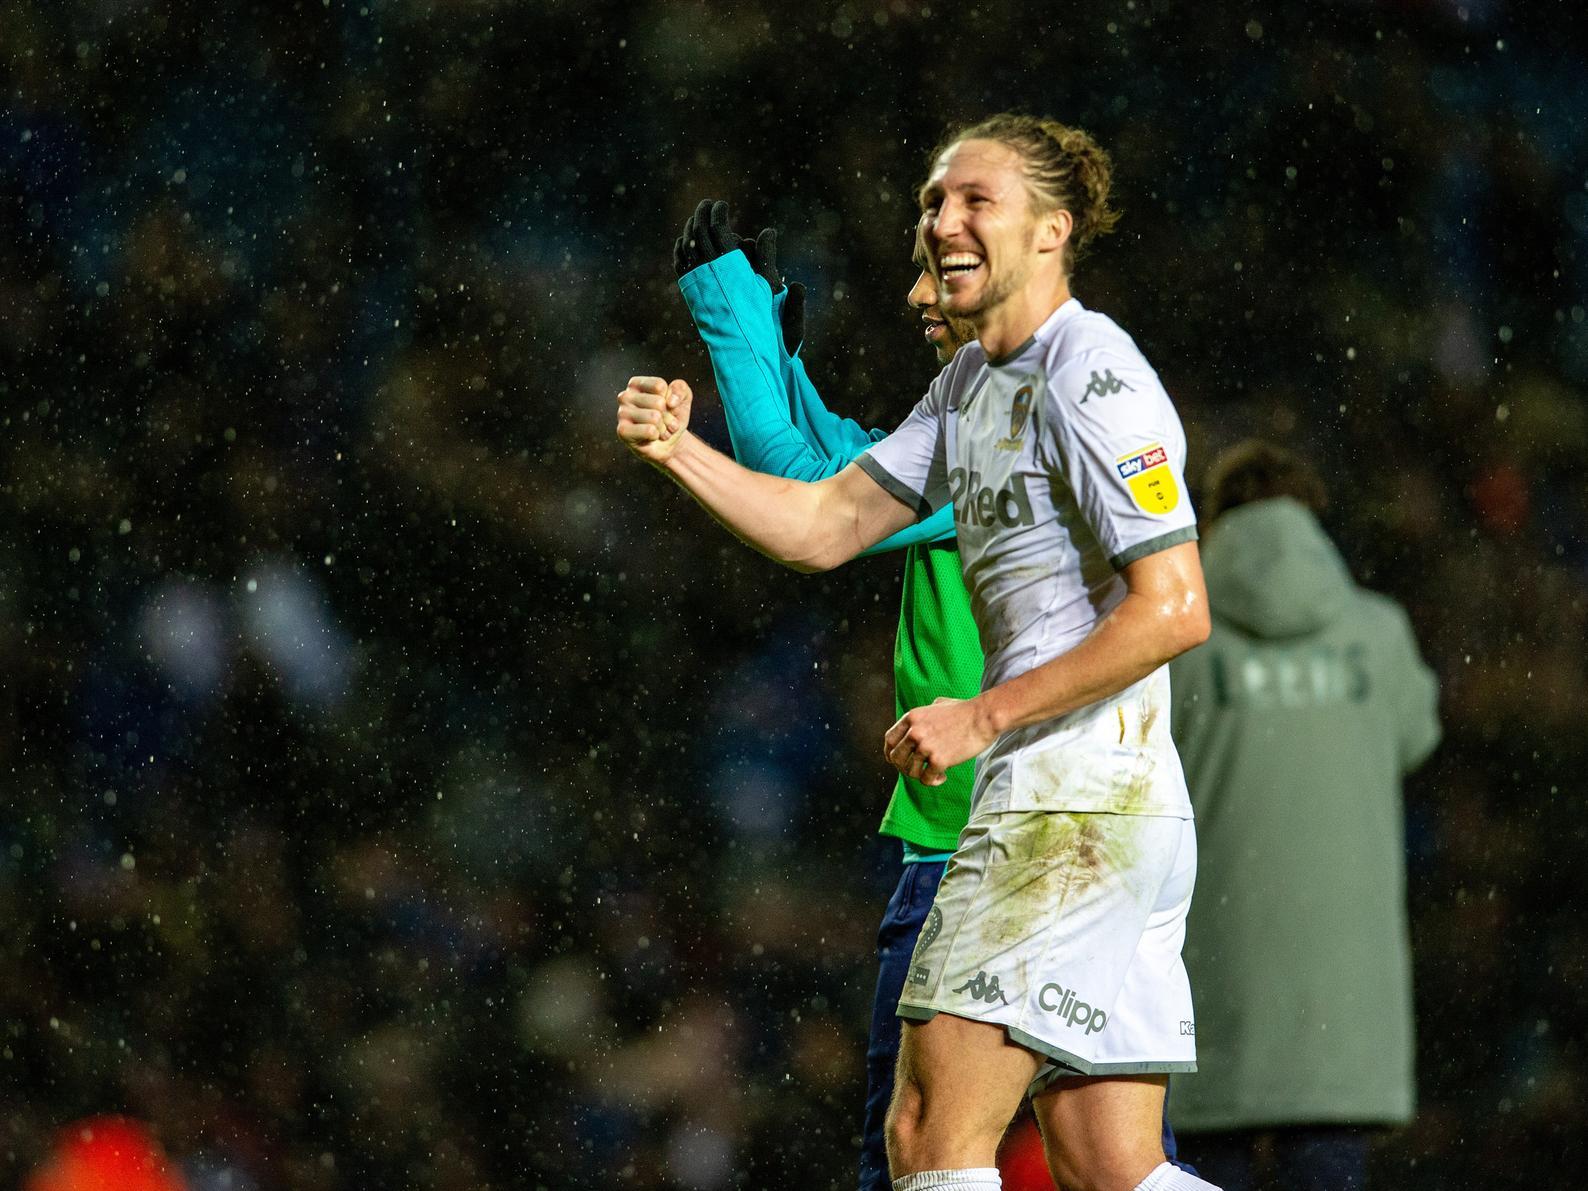 Last week's match-winner. What a stunning performance from Bill, Leeds need more of that this weekend.